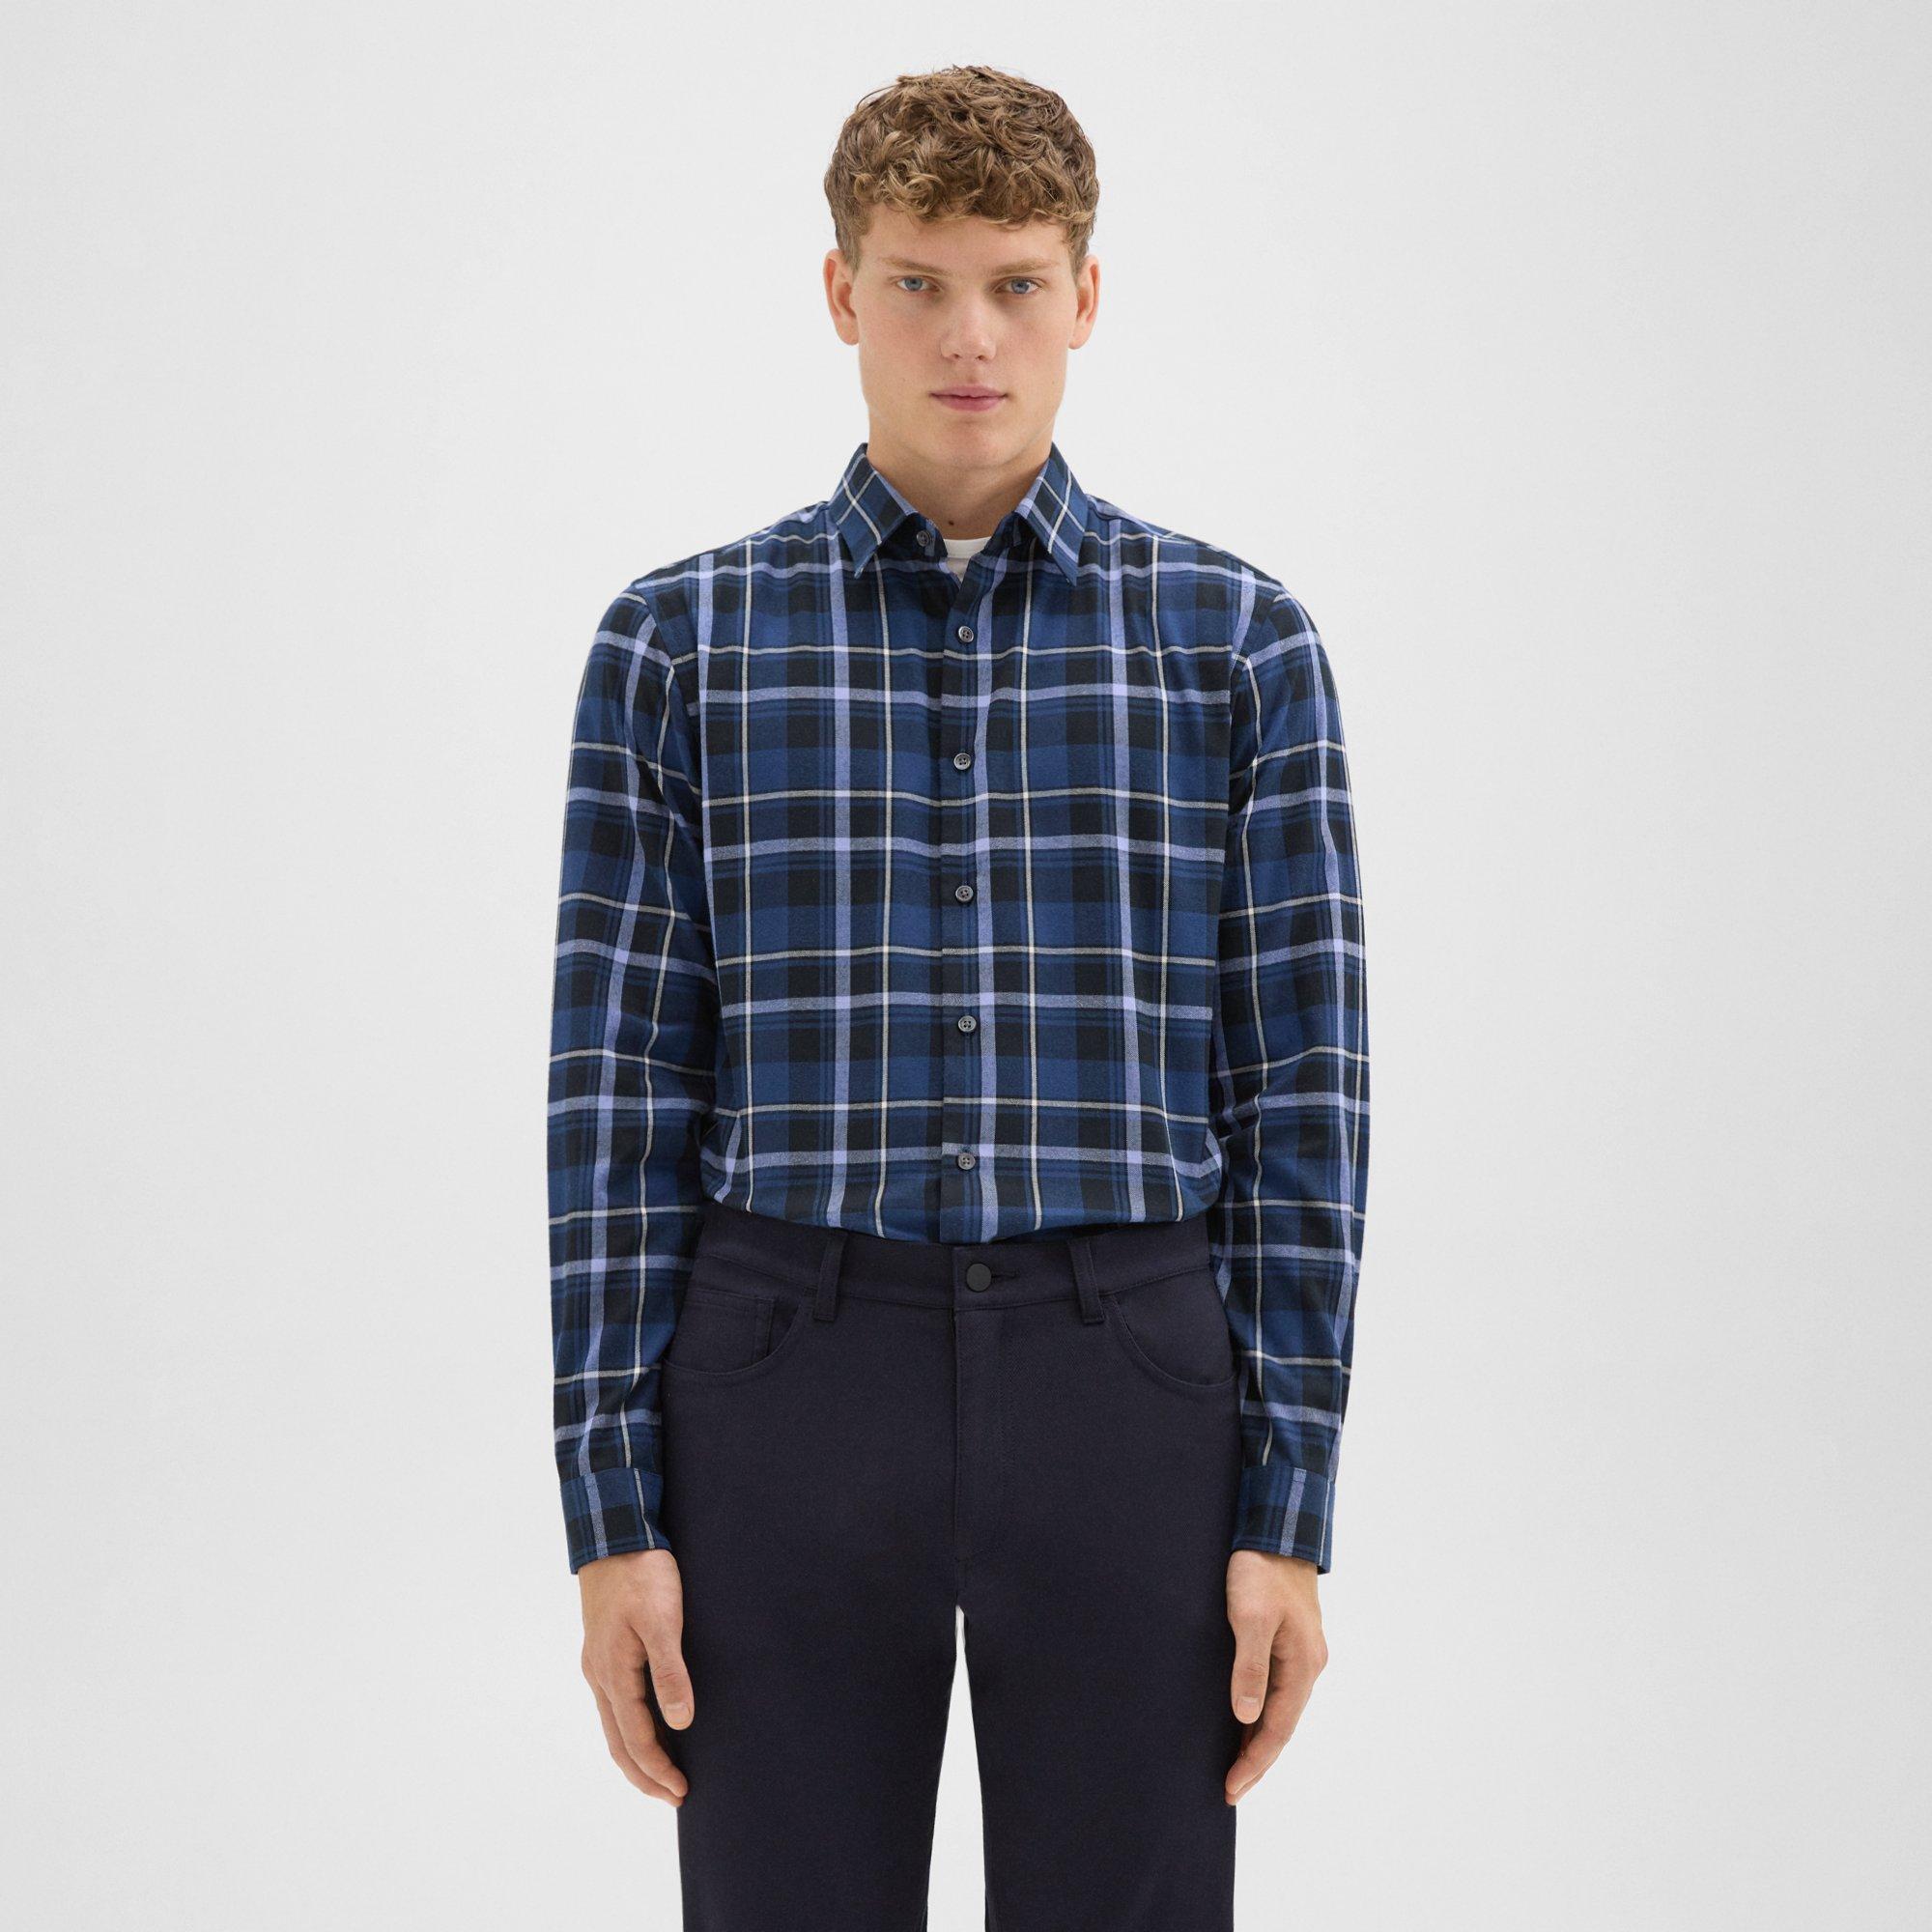 THEORY IRVING SHIRT IN PLAID TWILL FLANNEL